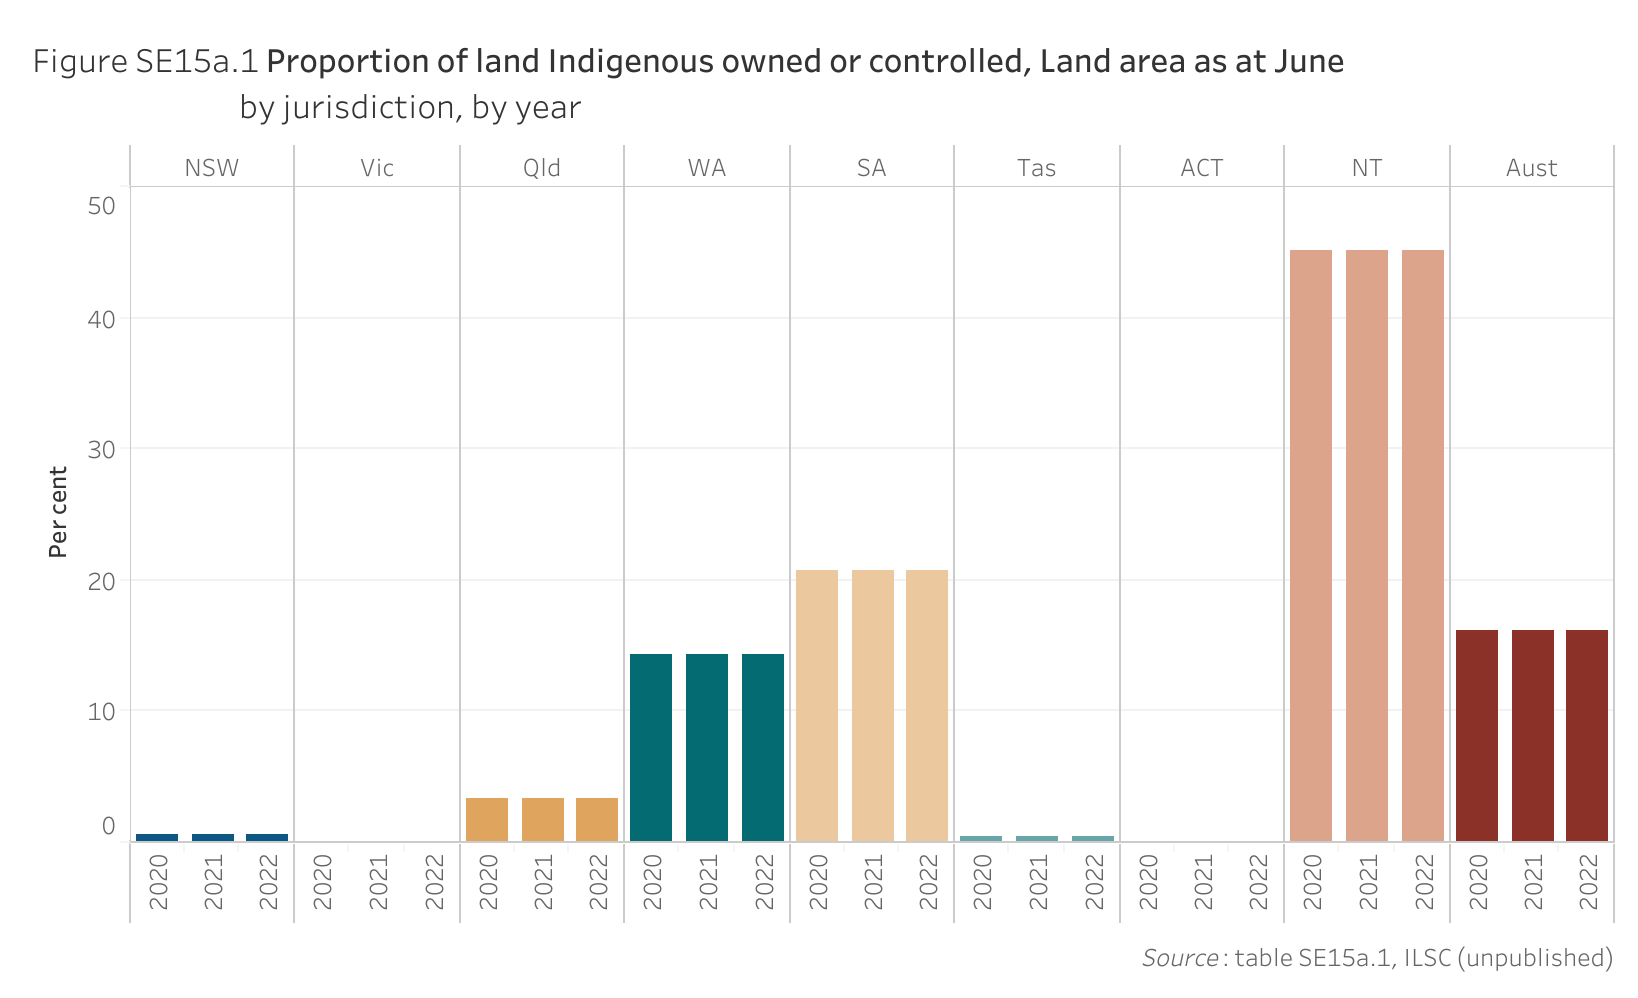 Figure SE15a.1 shows the proportion of land Indigenous owned or controlled, Land area as at June, by jurisdiction, by year. More details can be found within the text near this image.